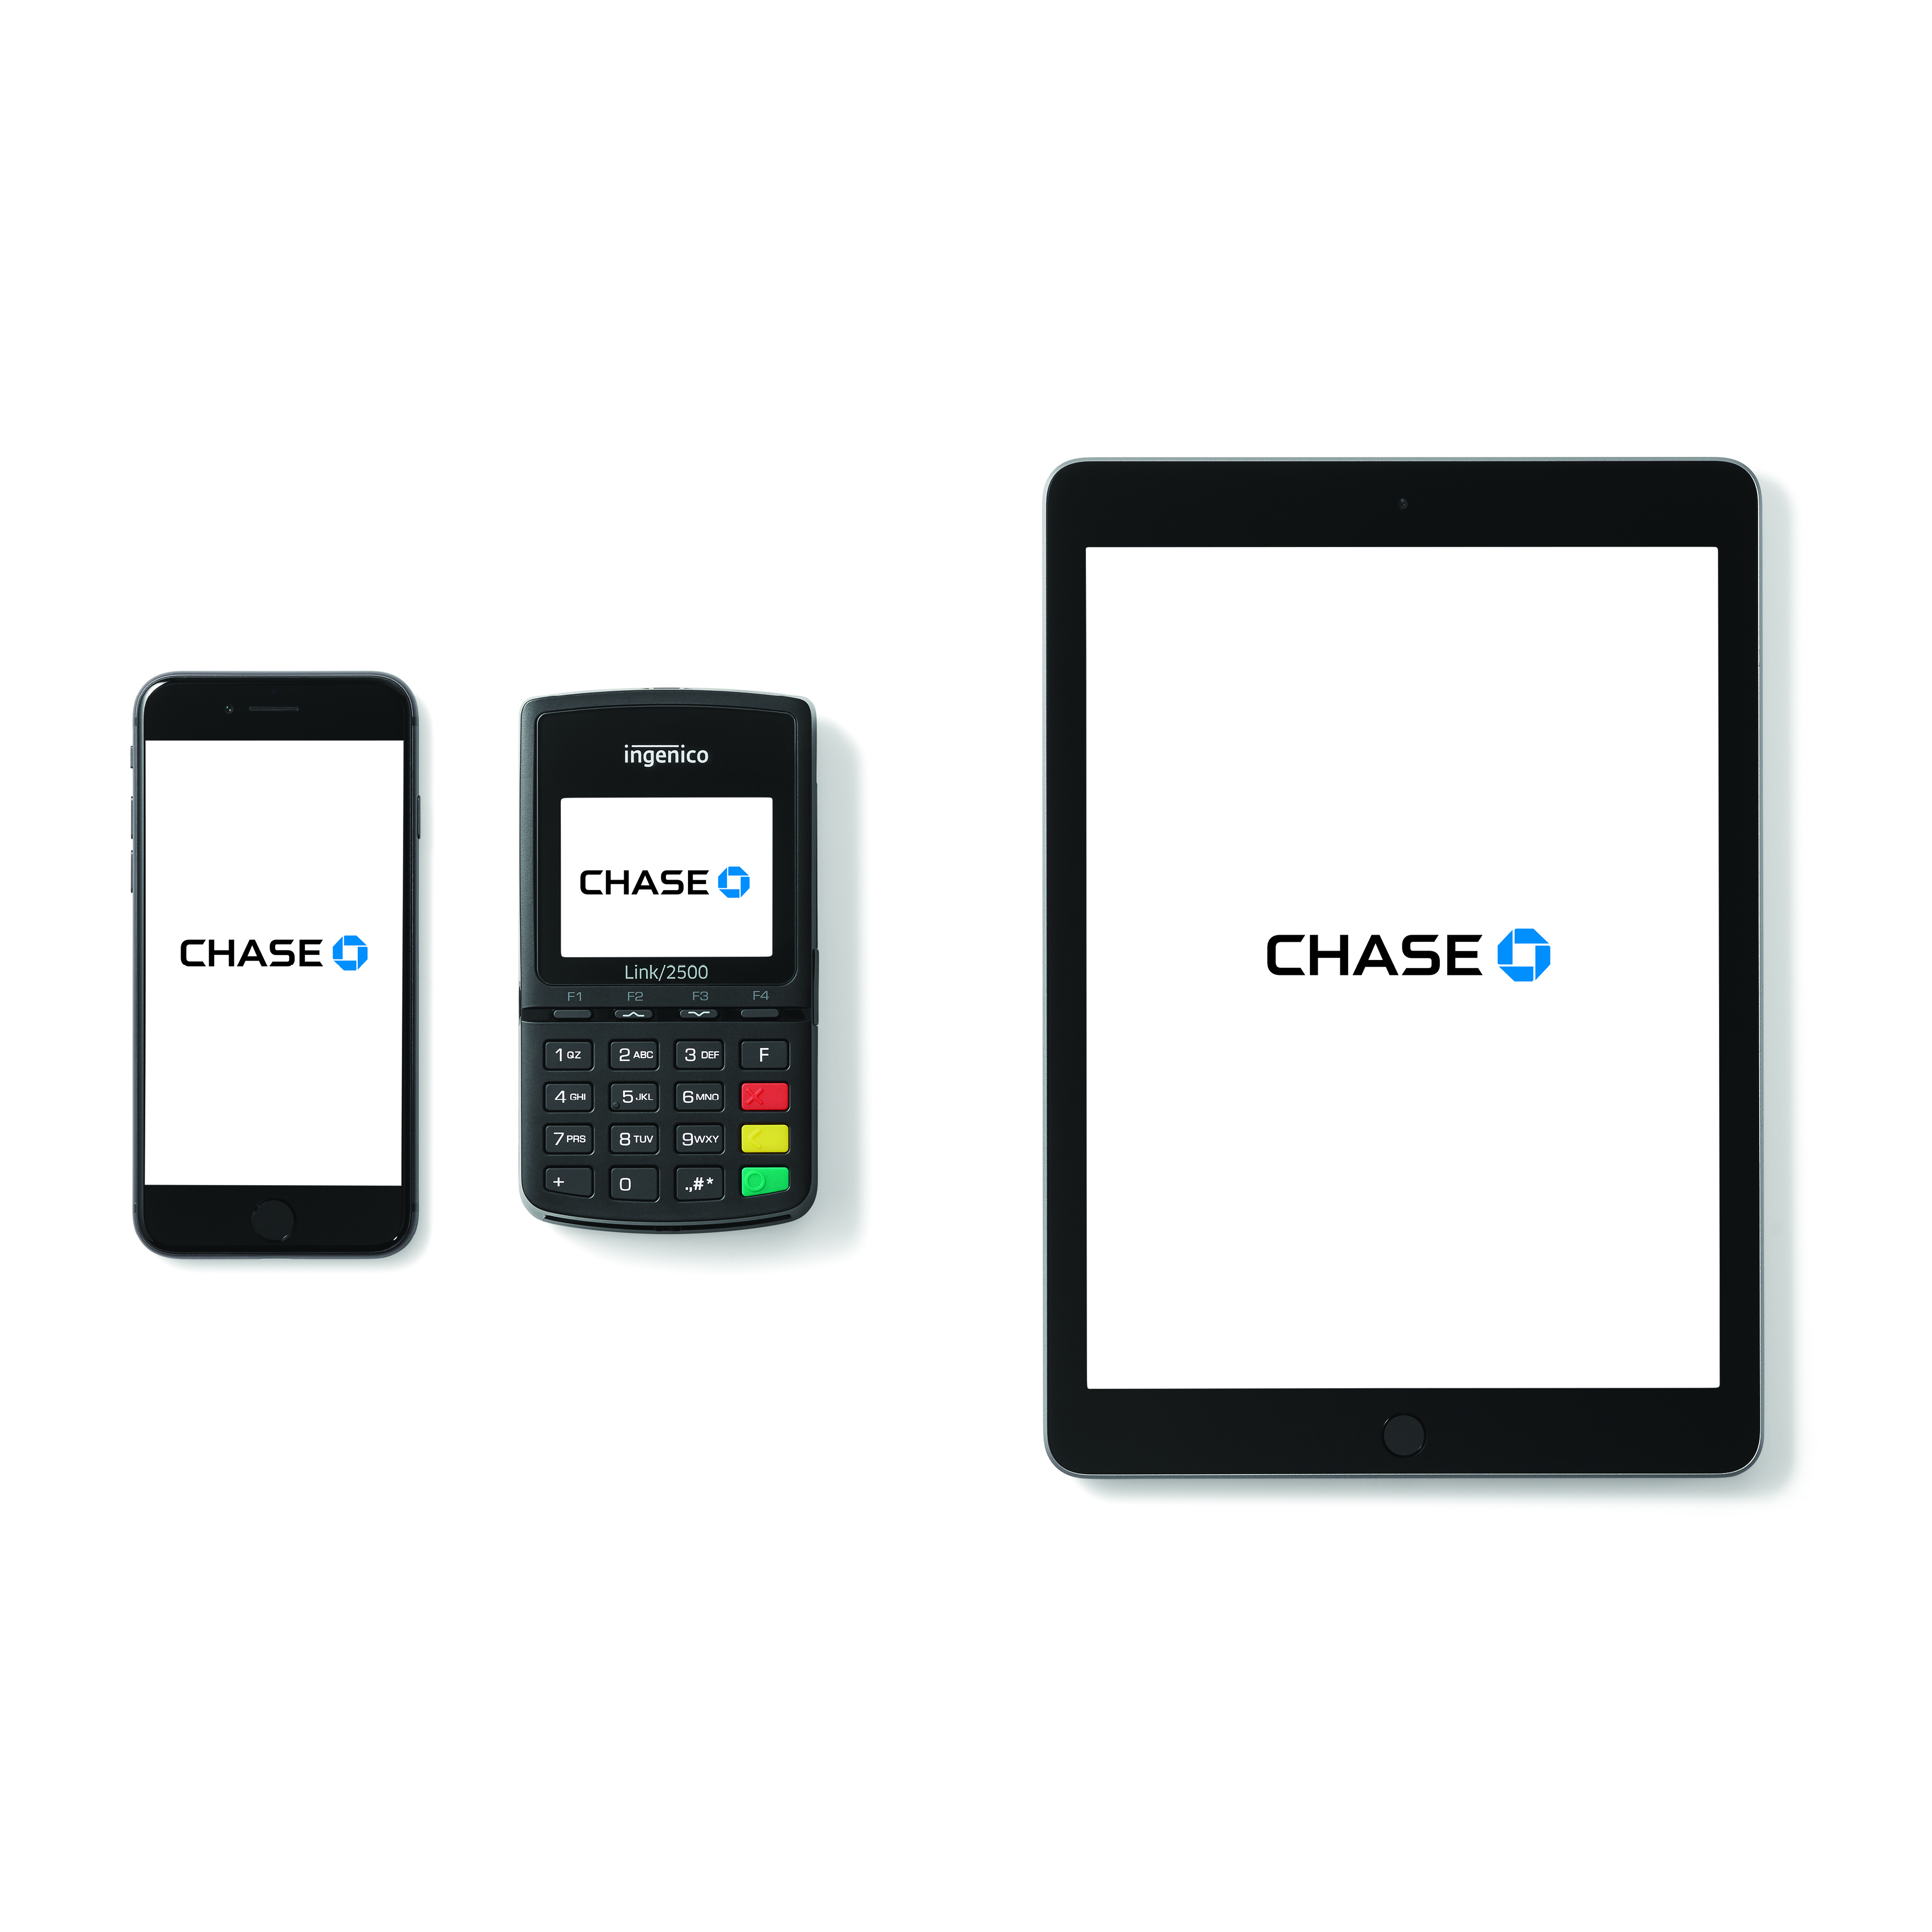 Chase mobile checkout sign up account